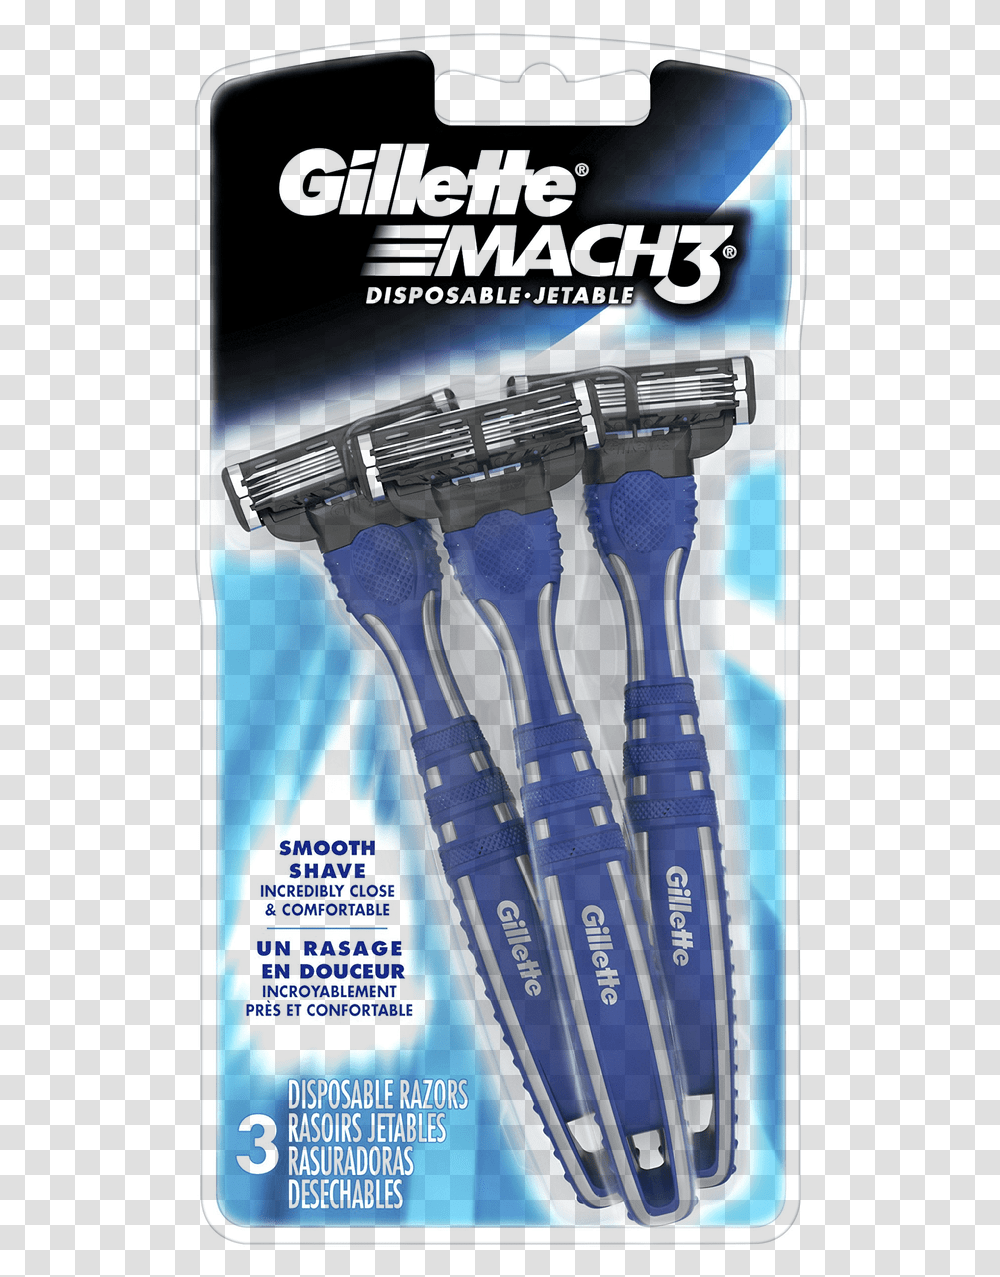 Gillette Mach 3 Disposable Razor, Piano, Musical Instrument, Crystal, Poster Transparent Png